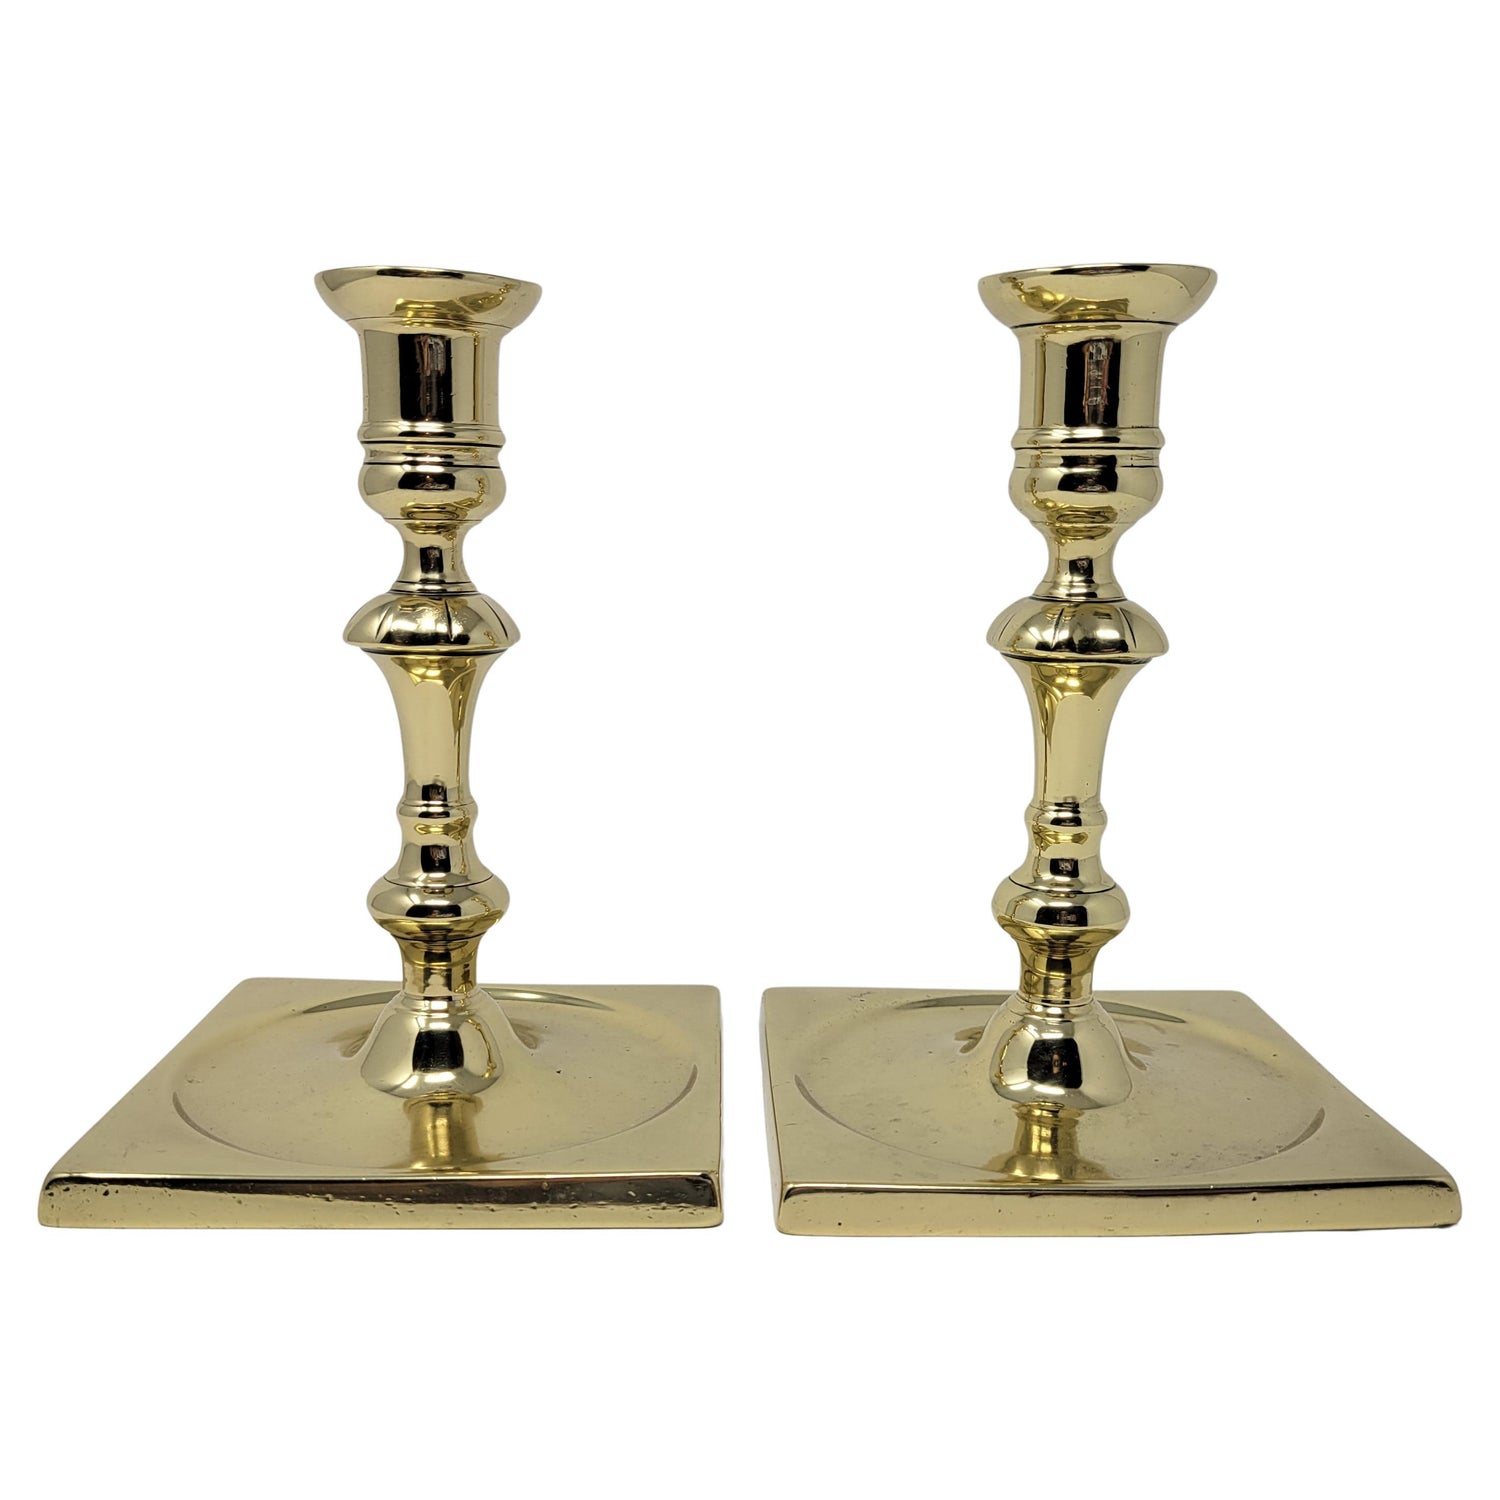 18th Century English Brass Petal-Base Candlesticks For Sale at